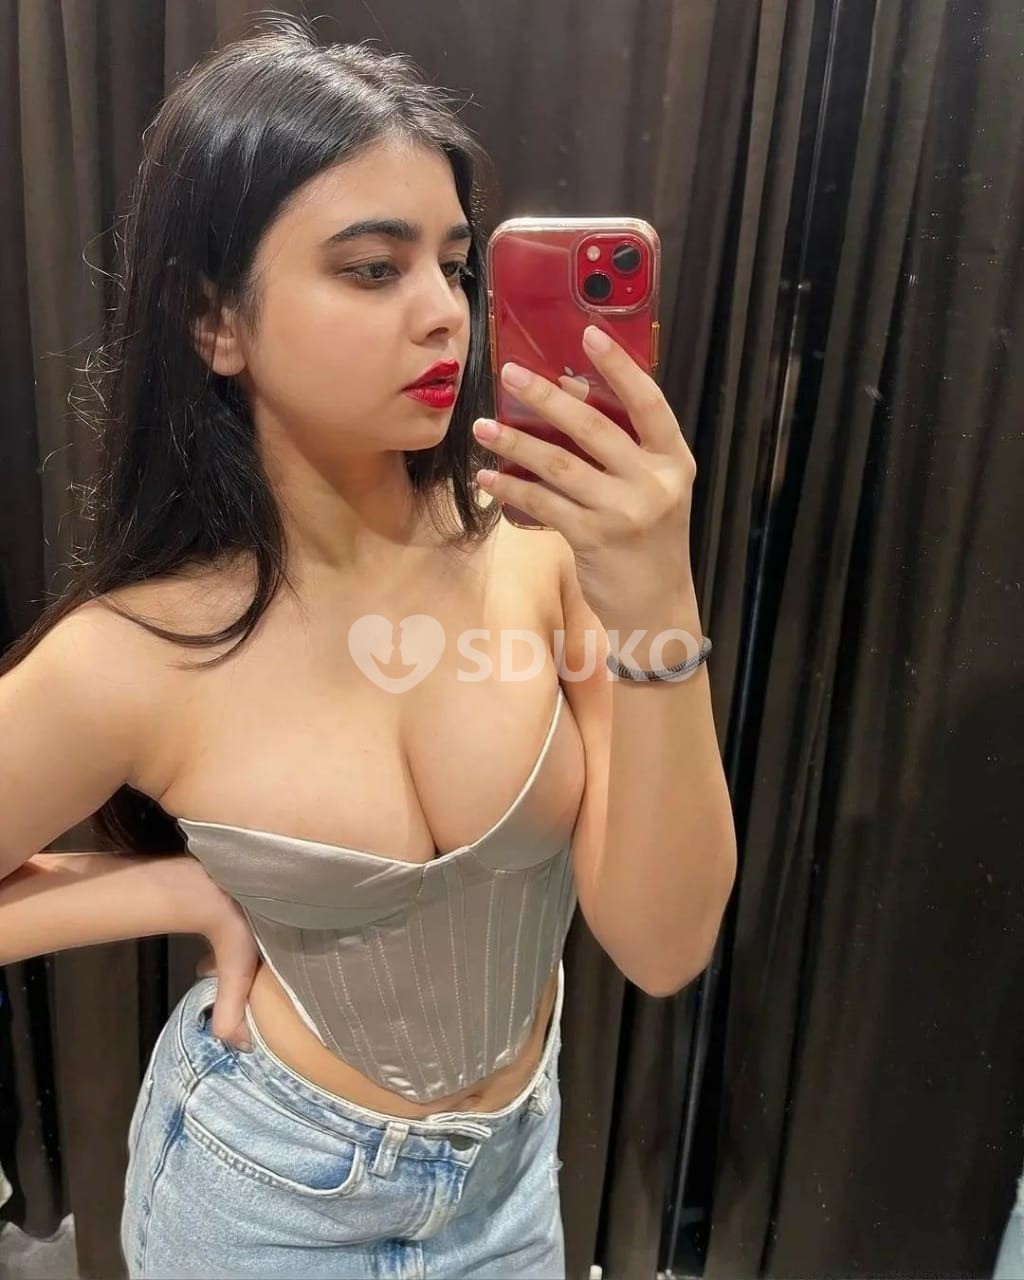 Ameerpet all areaVIP hot girl available all type sex genuine safe and secure service high profiles